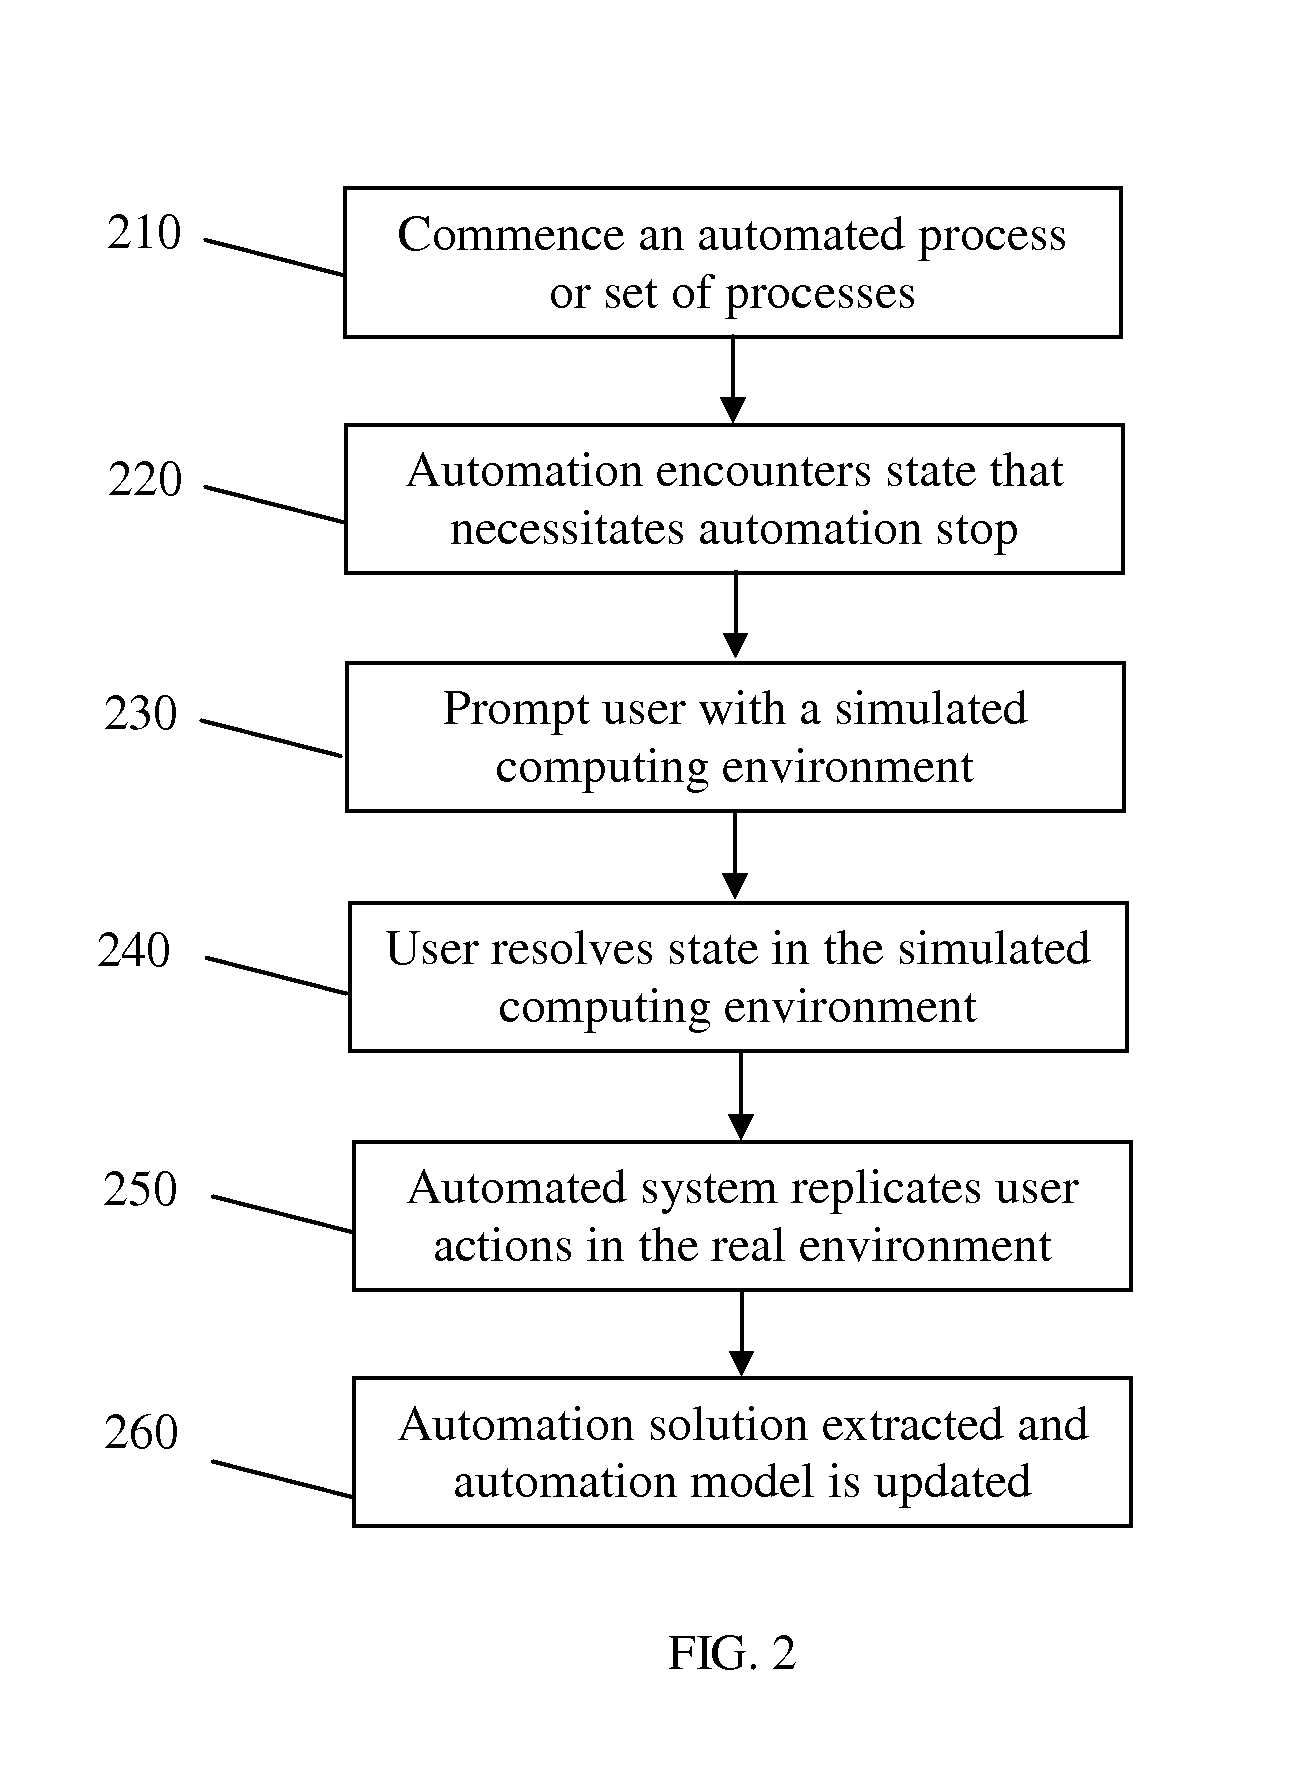 System And Method For On-Demand Simulation Based Learning For Automation Framework